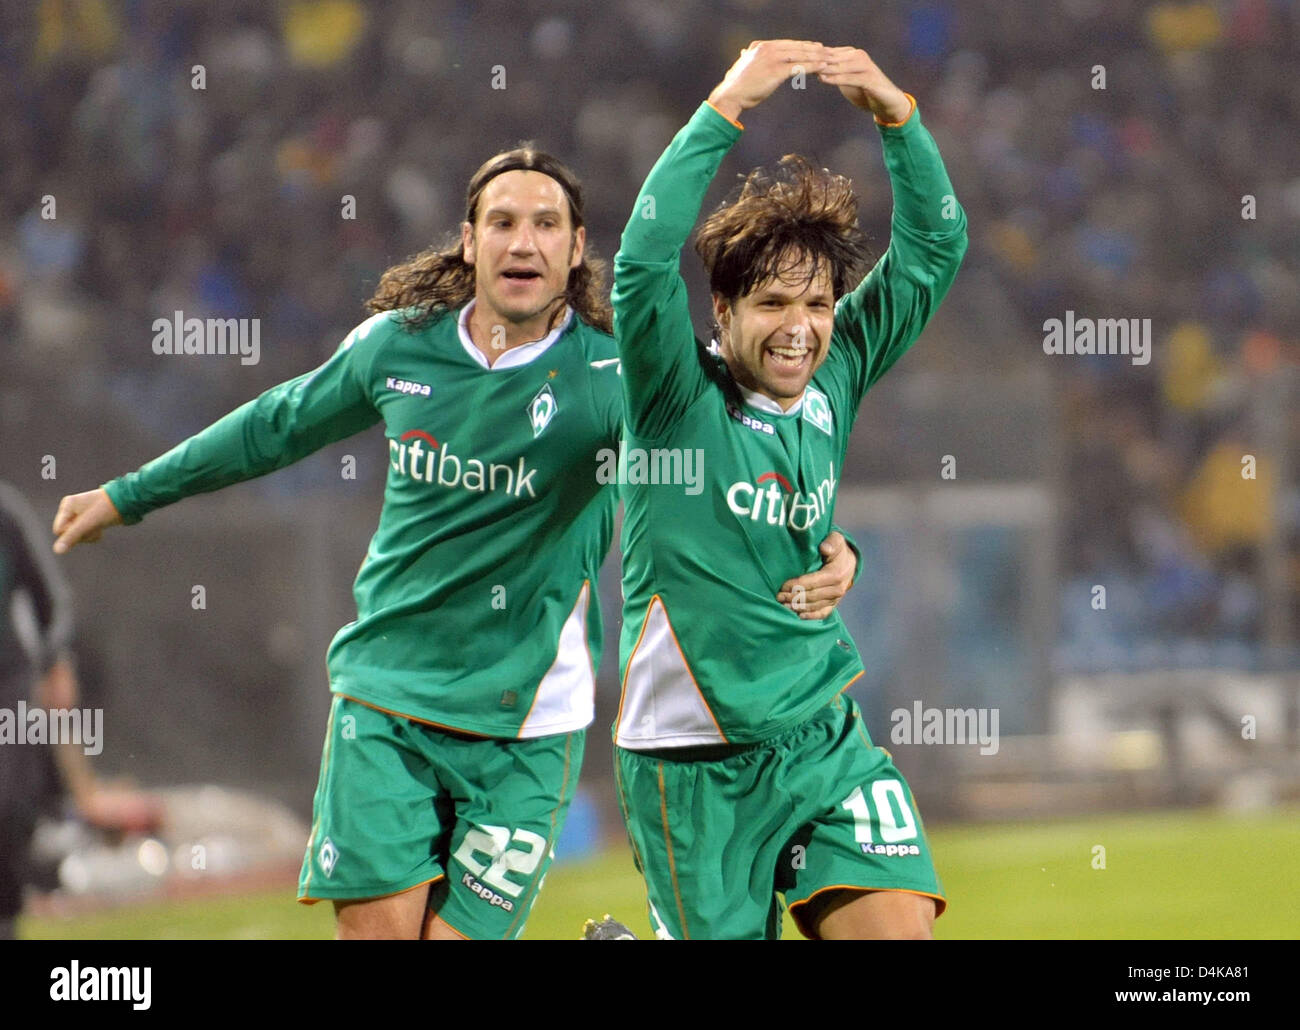 Bremen?s Diego (R) cheers with his team mate Torsten Frings after his second goal to 3-2 during the UEFA Cup quarter finals second leg match Udinese vs Werder Bremen at Stadio Friuli in Udine, Italy, 16 April 2009. The match tied 3-3. Photo: Carmen Jaspersen Stock Photo